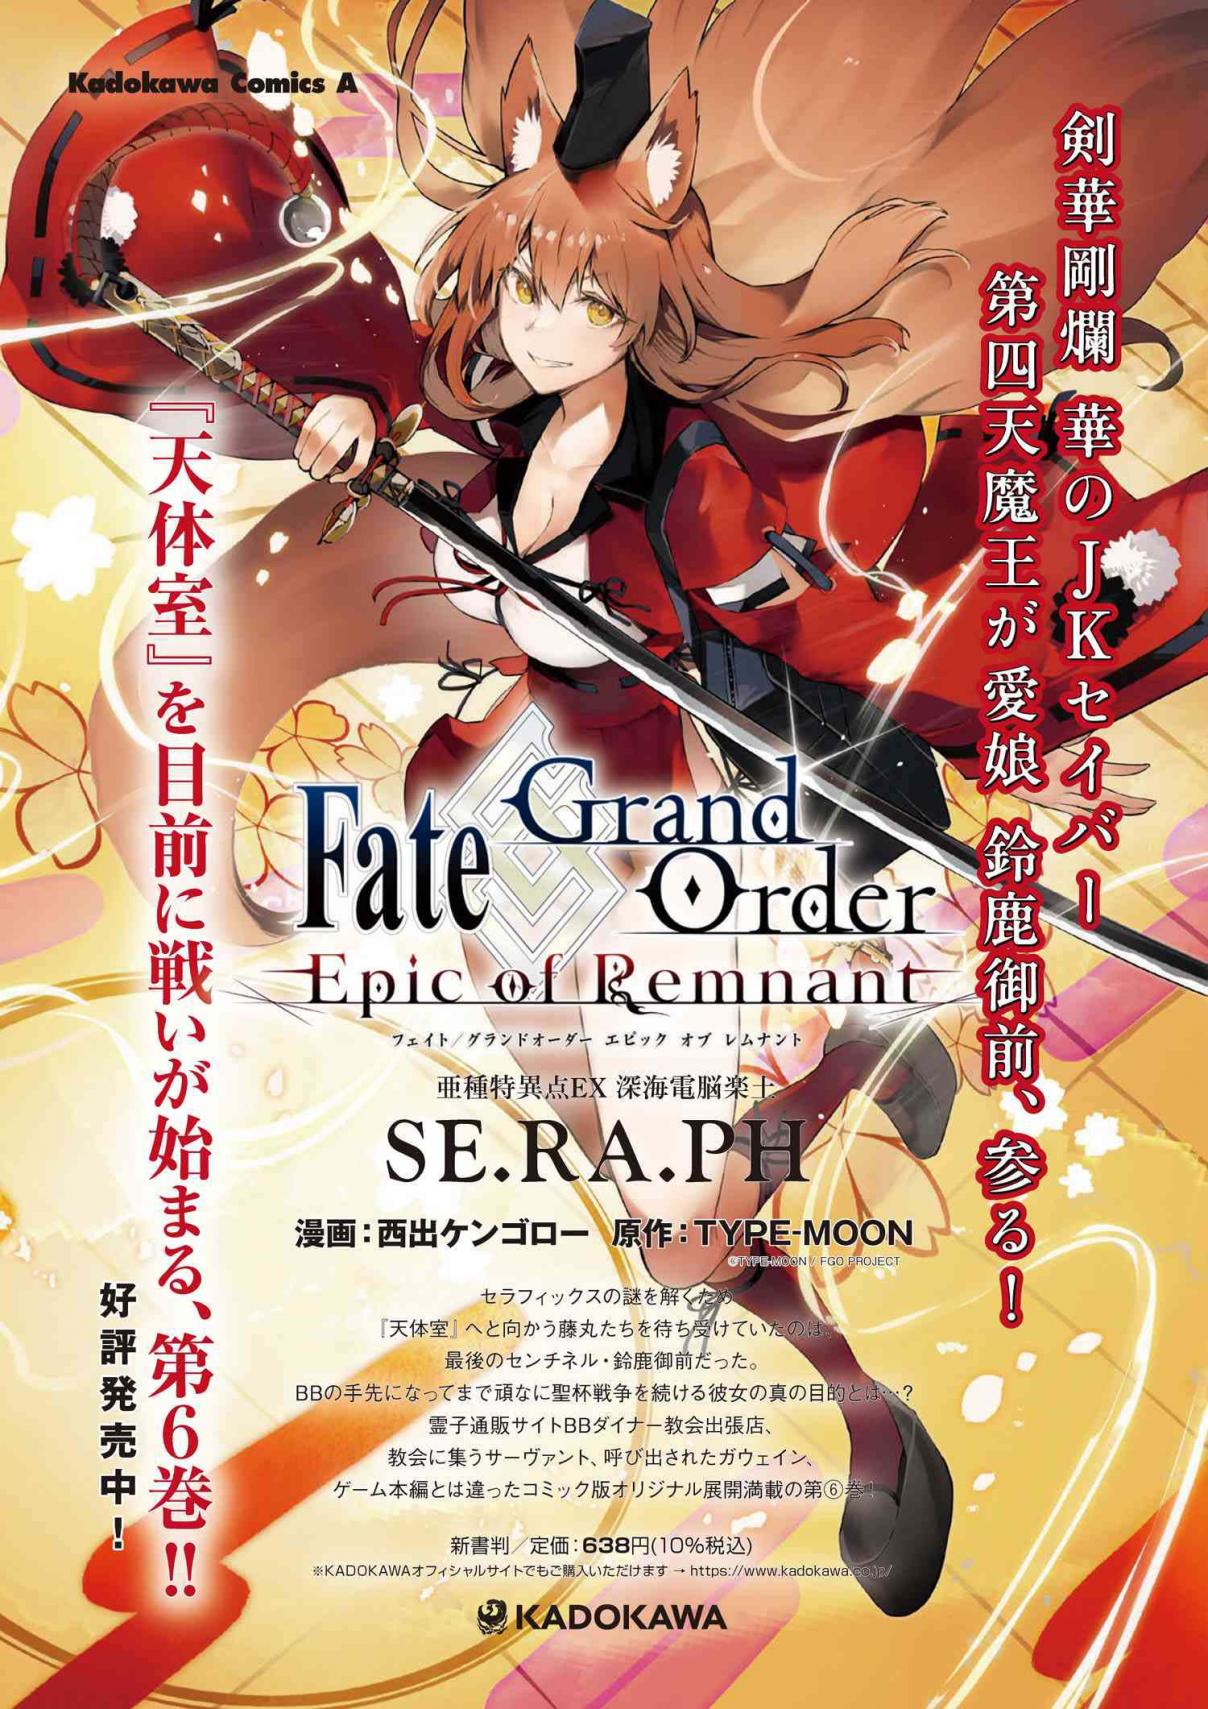 Fate/Grand Order -Epic of Remnant- Deep Sea Cyber-Paradise, SE.RA.PH 28.1